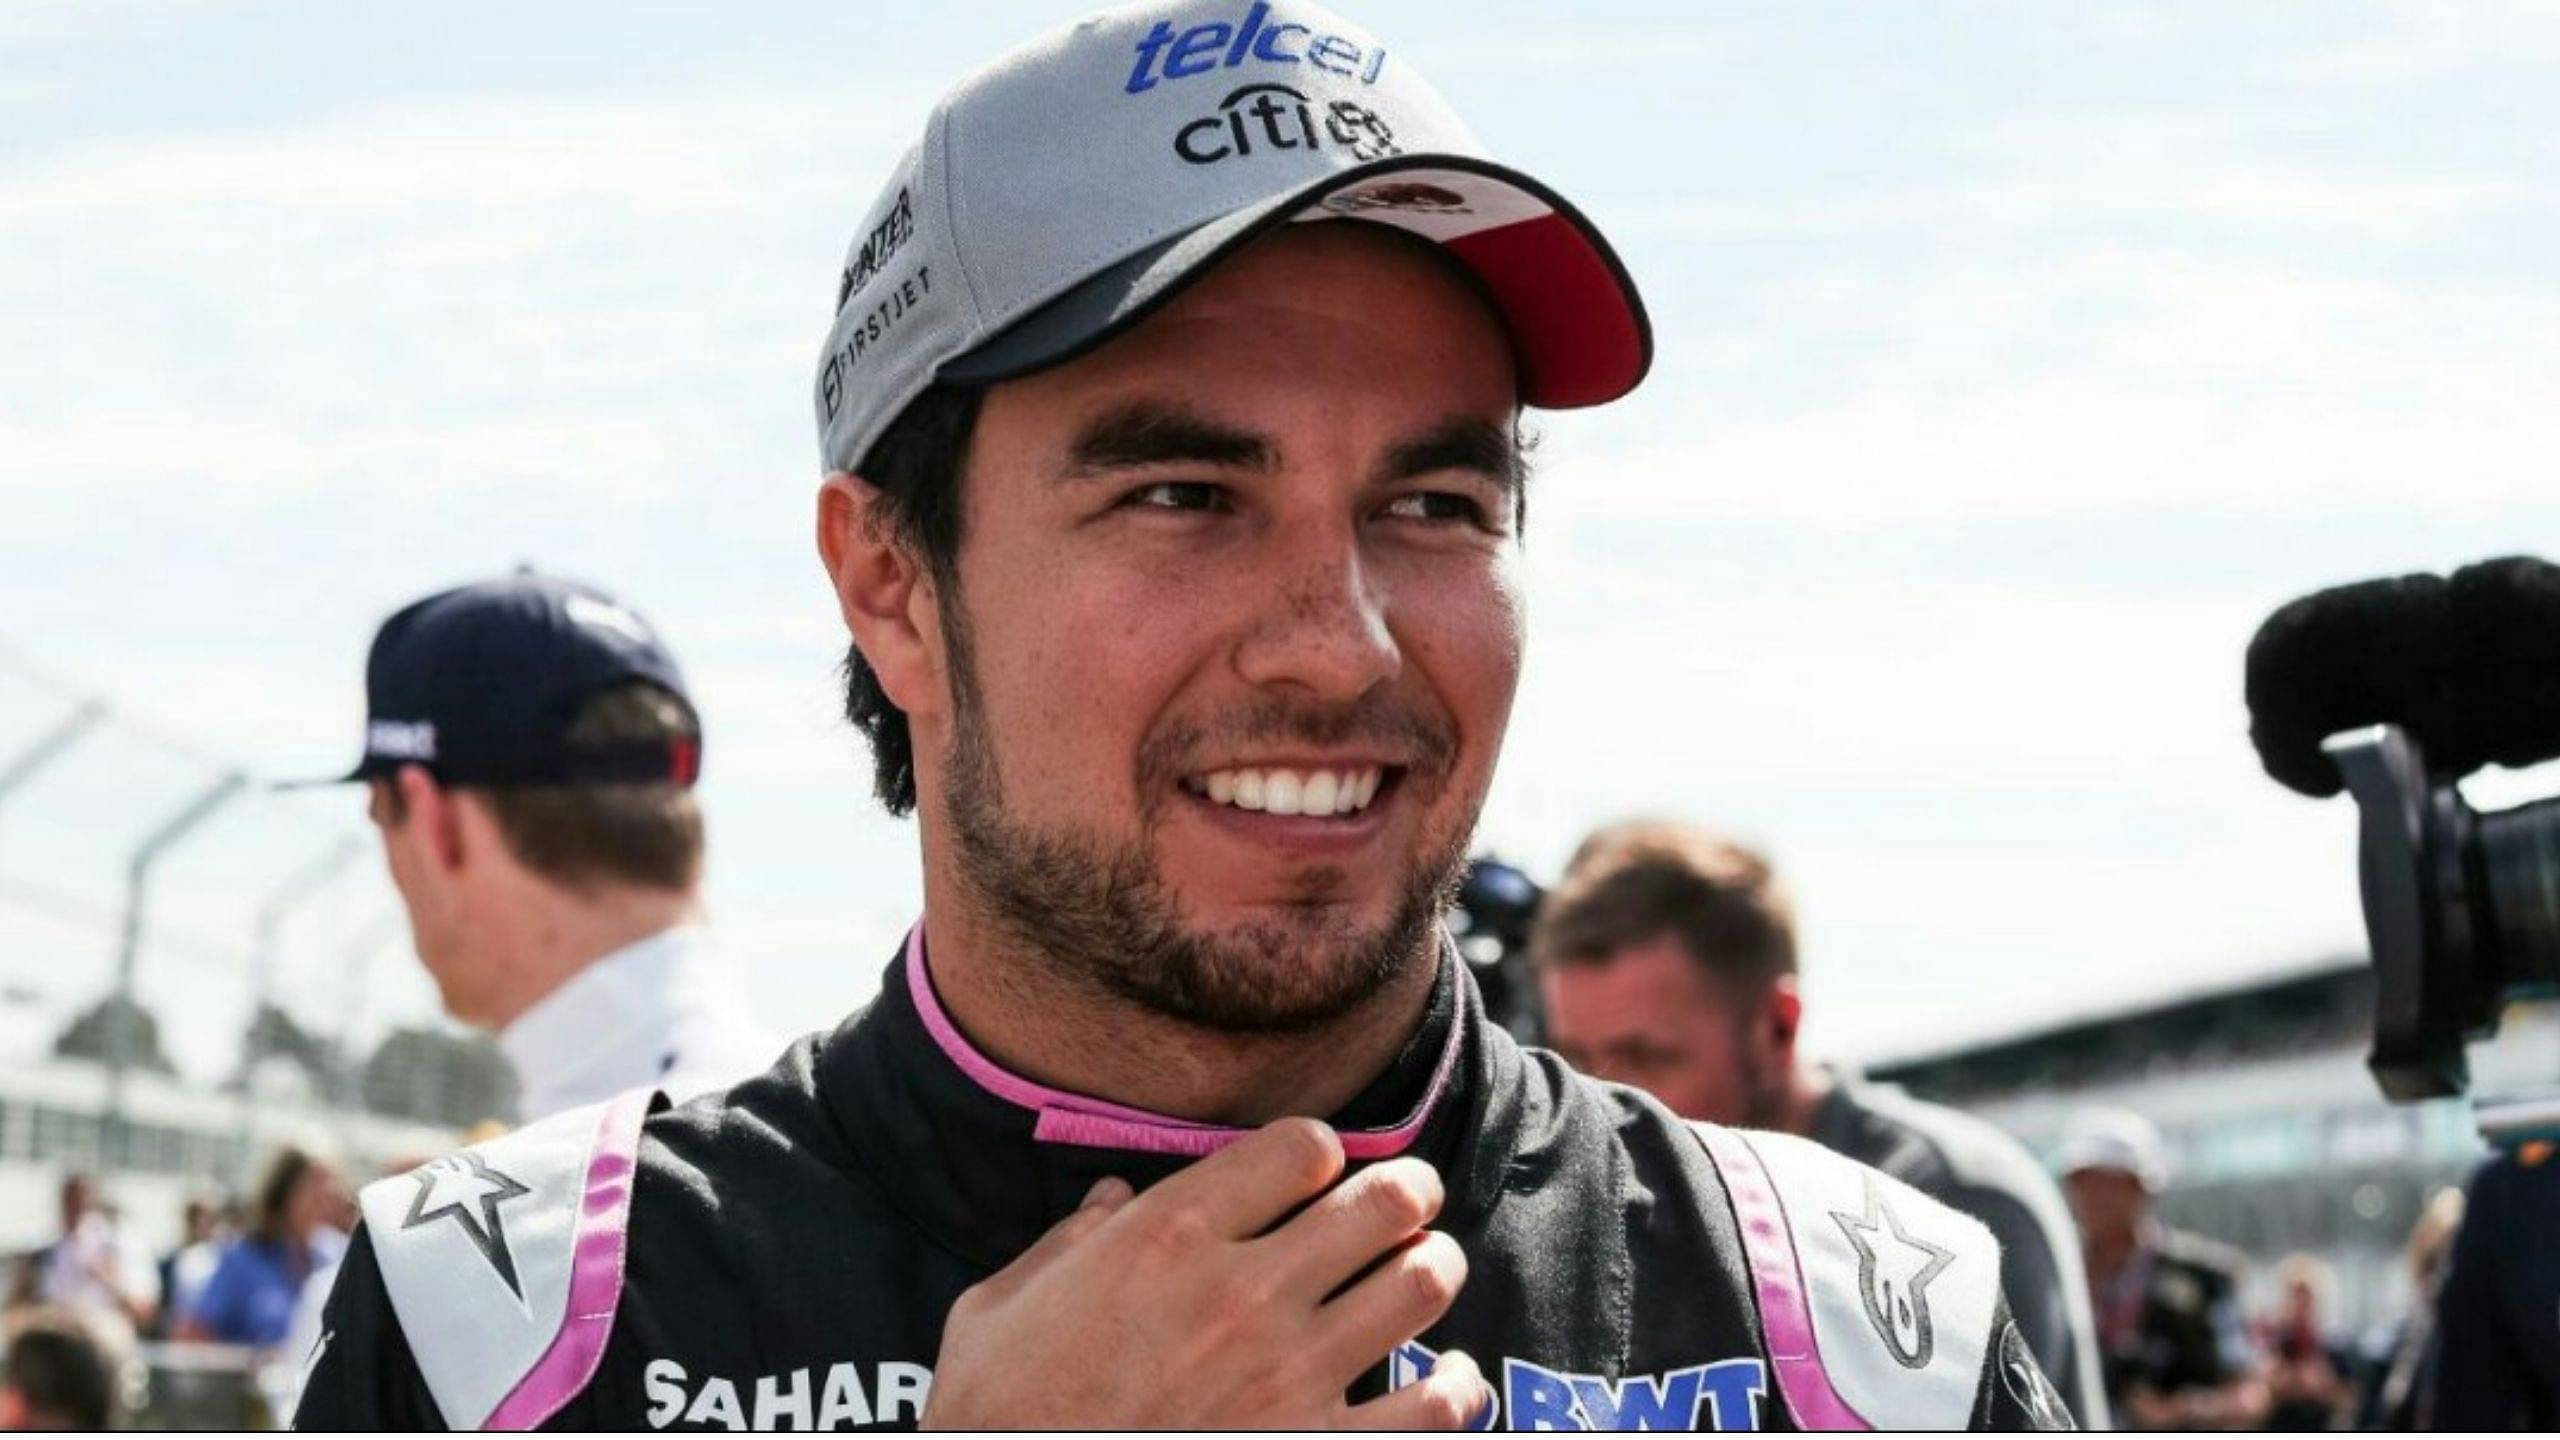 “I really needed those races so much in my career" - Sergio Perez rues missing out on double-header Silverstone races due to Covid-19